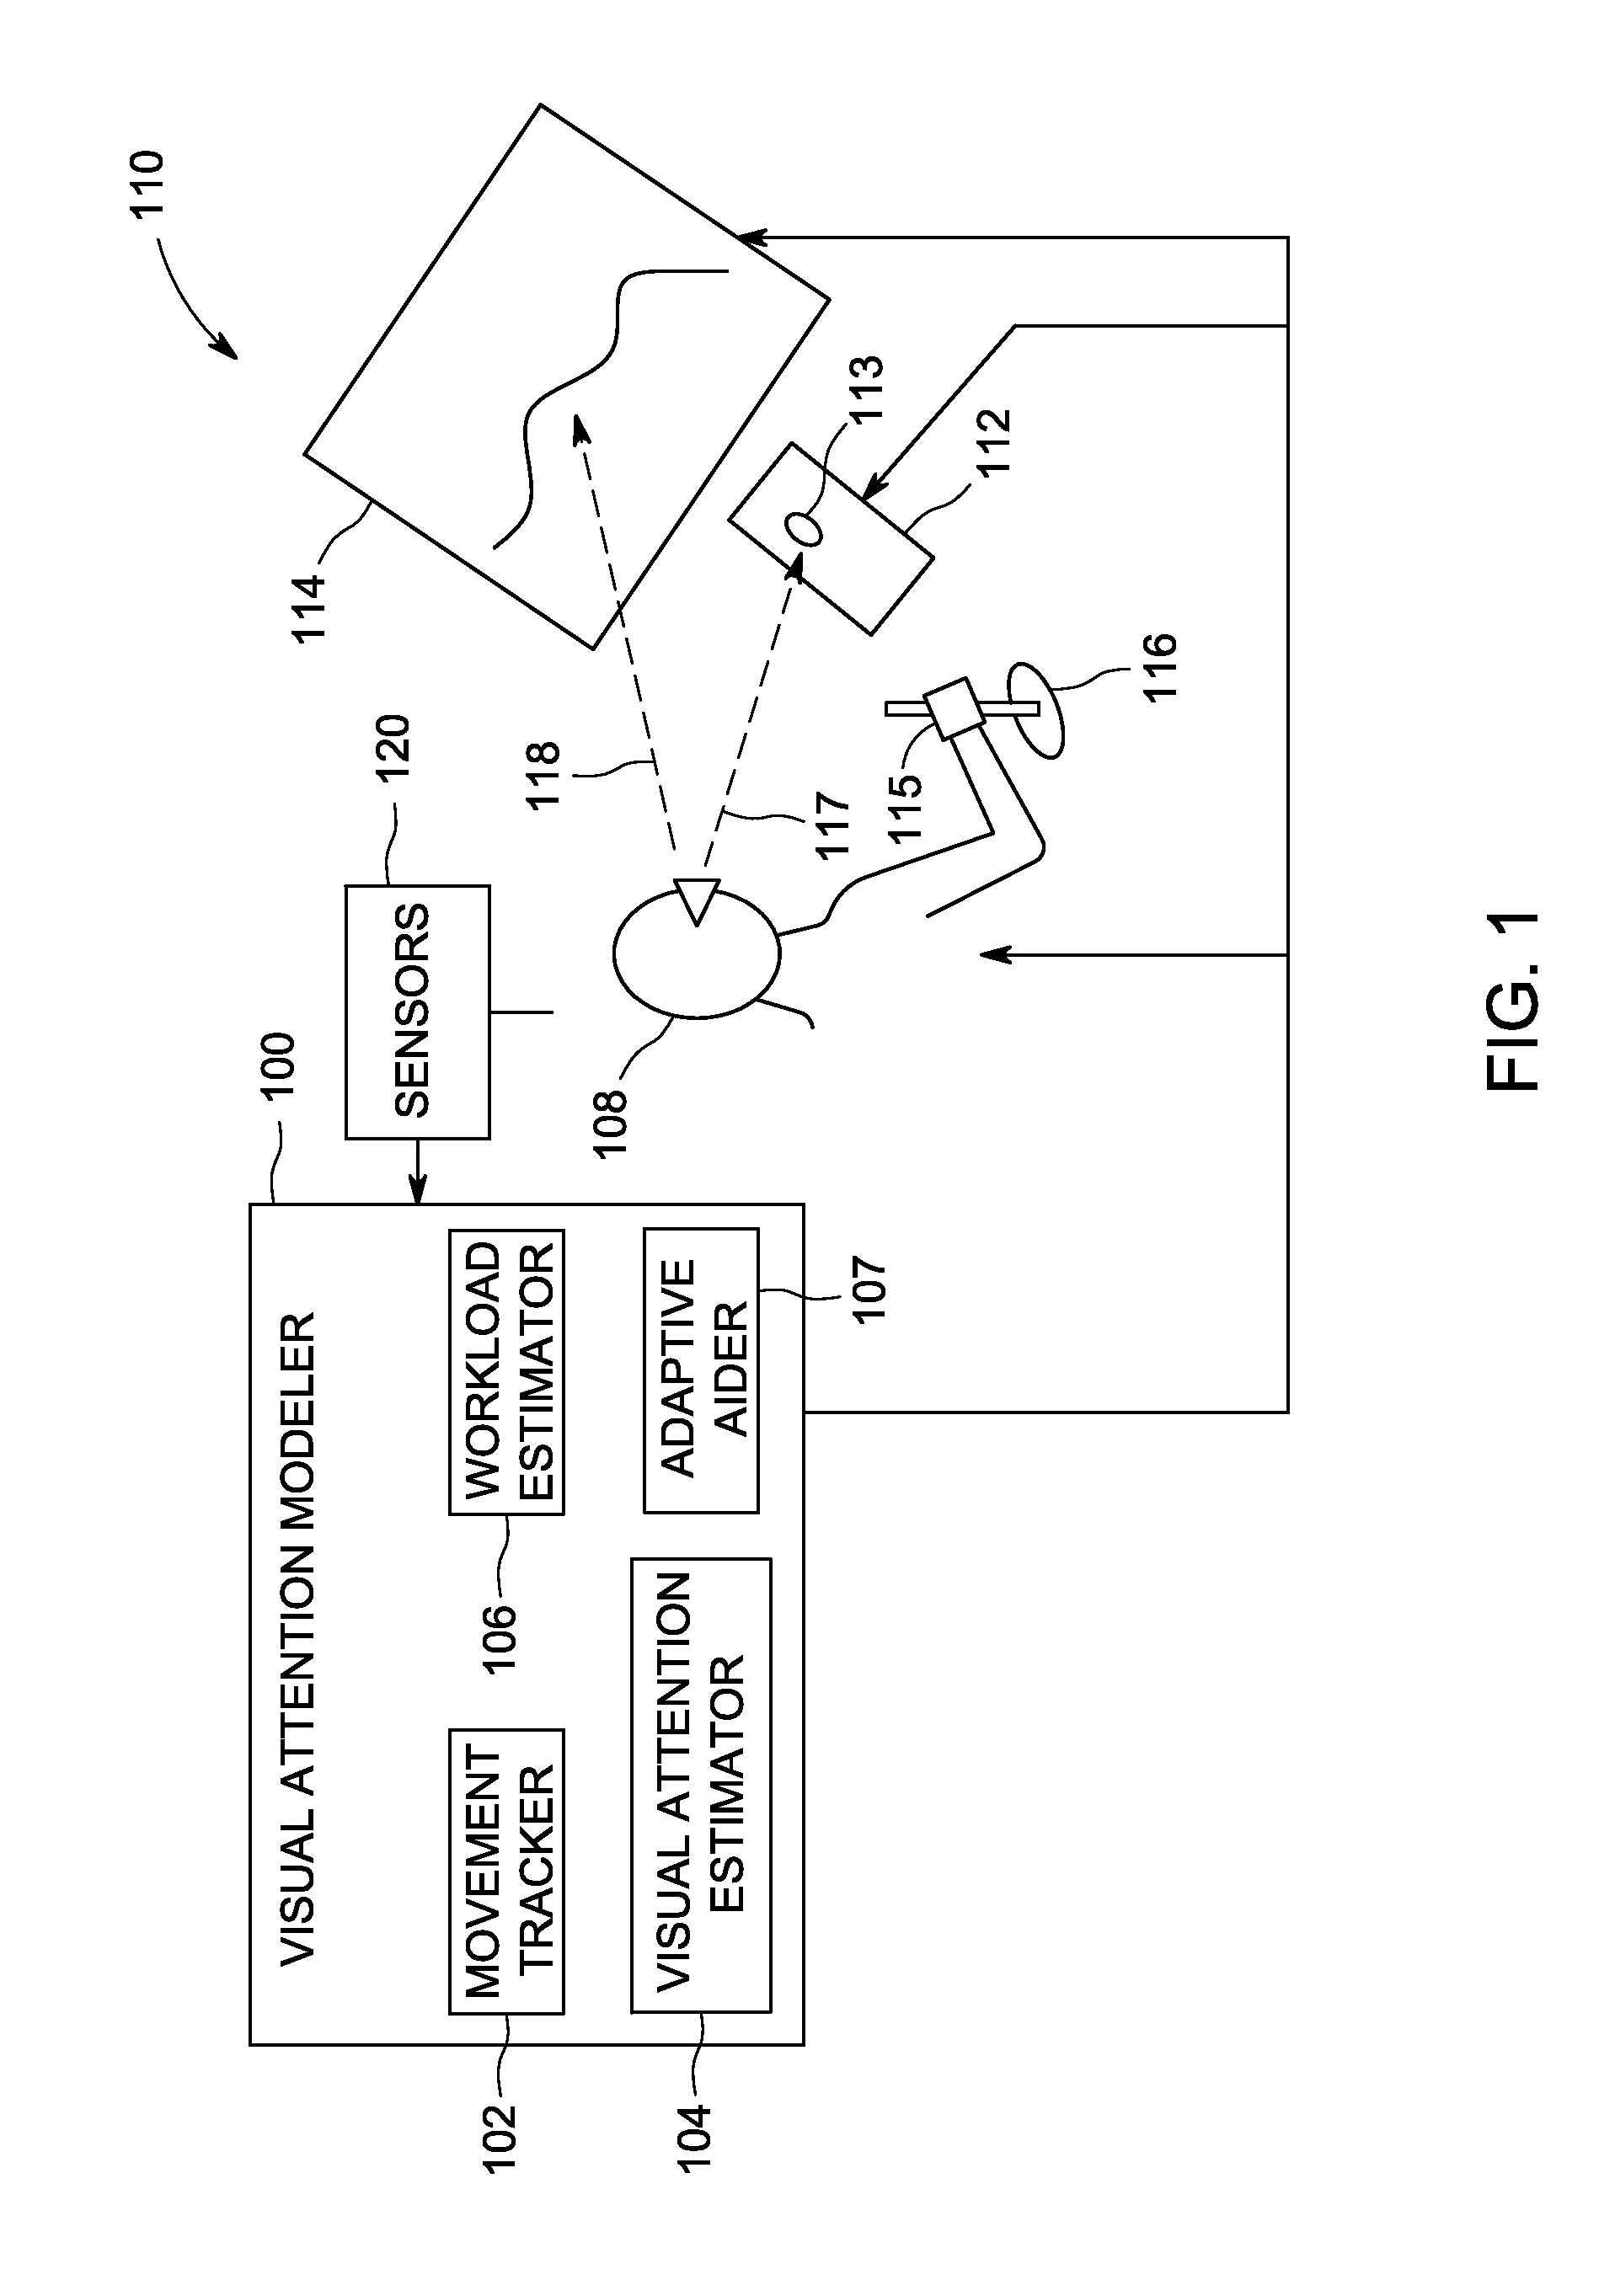 Method and apparatus for facilitating attention to a task